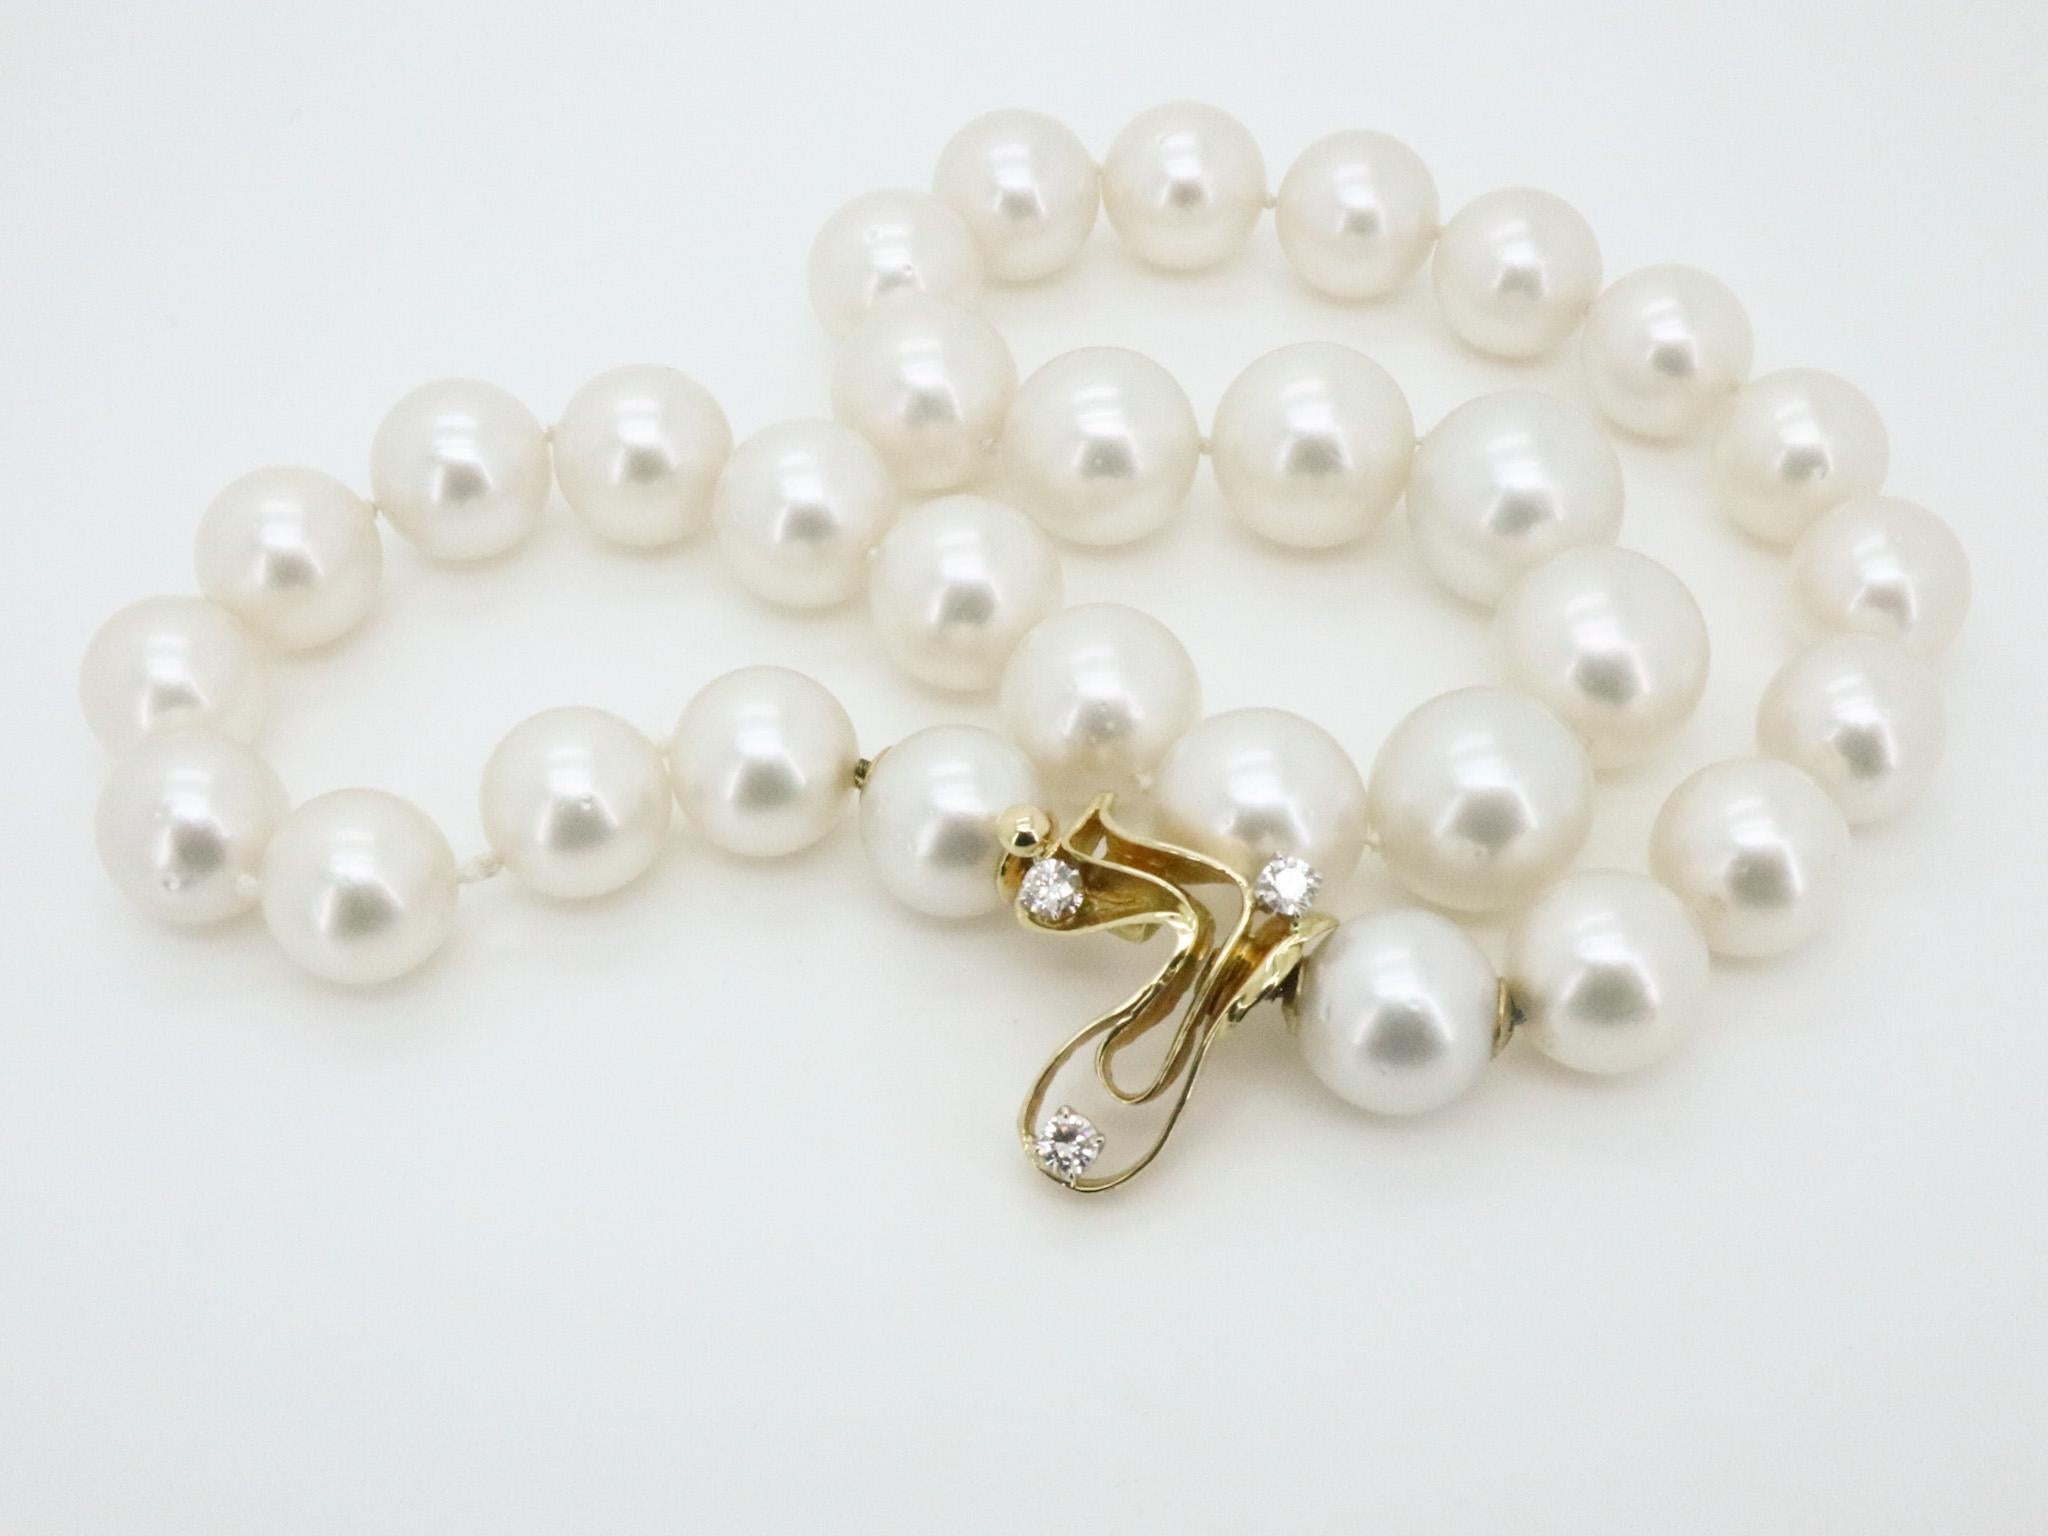 620 carat Australian South Sea Pearls 18K Yellow Gold  Diamonds Clasp Necklace For Sale 4